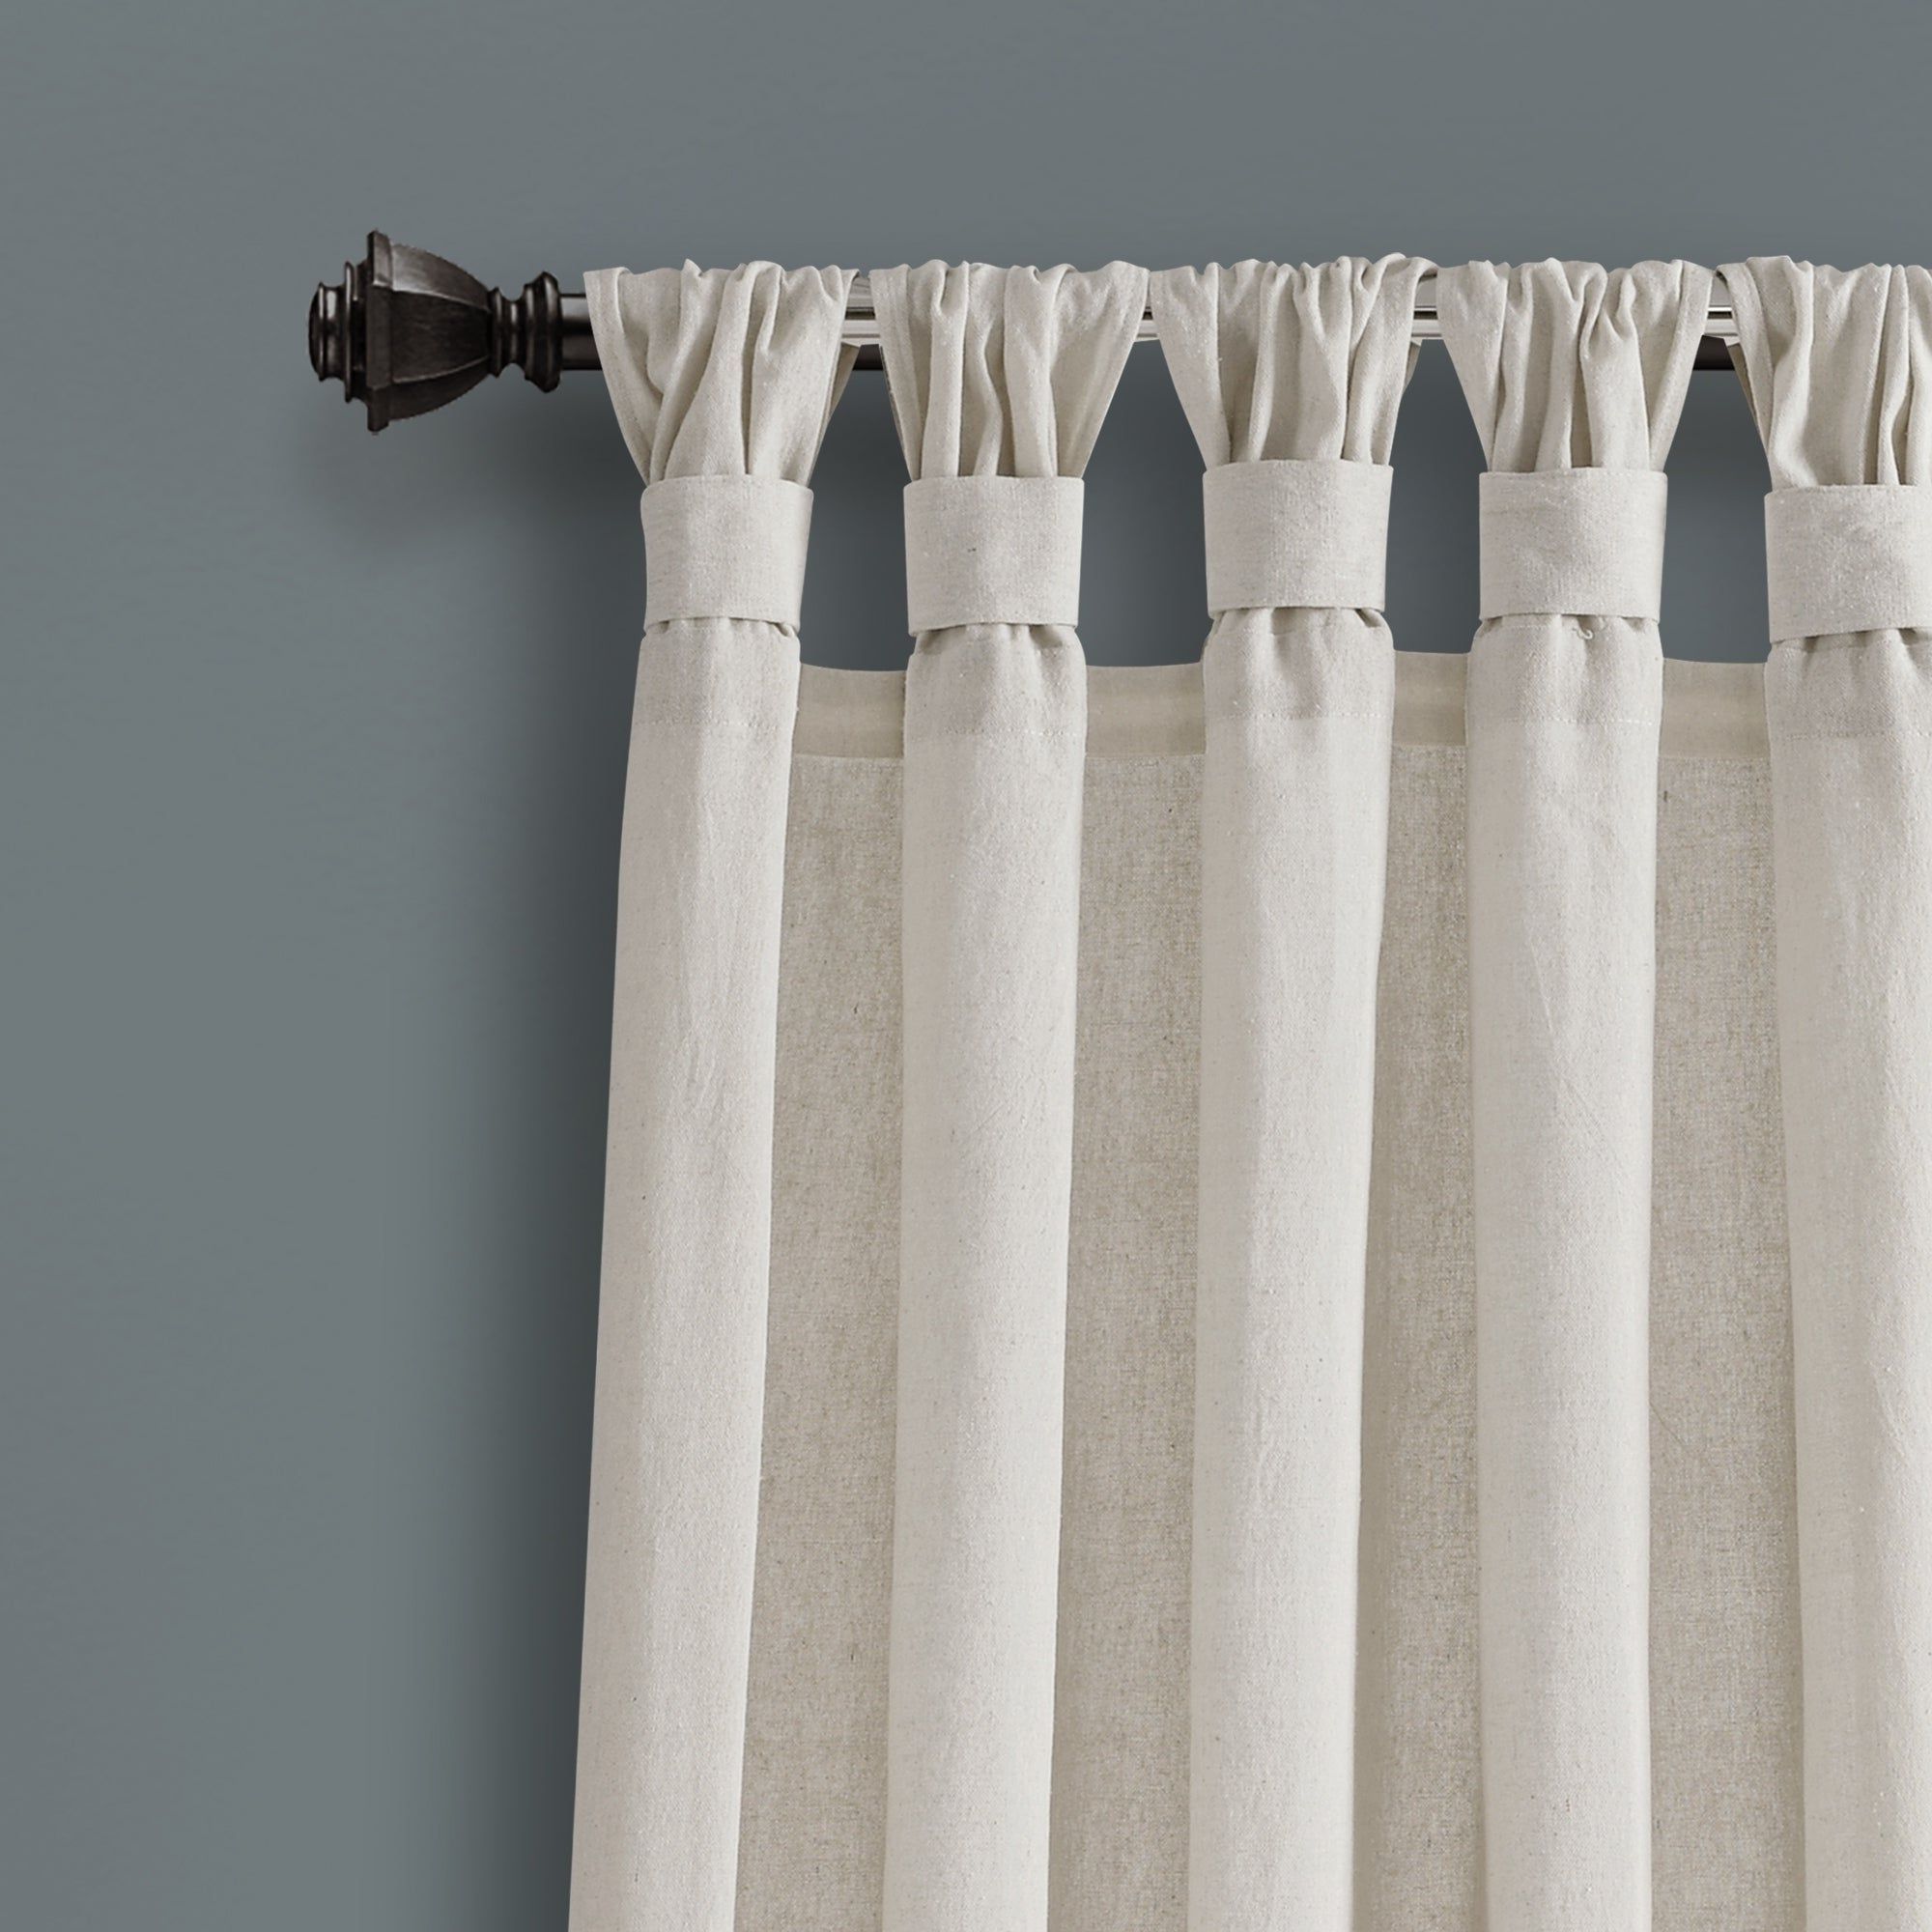 Porch & Den Alsea Burlap Knotted Tab Top Window Curtain Panel Pair With Regard To Trendy Knotted Tab Top Window Curtain Panel Pairs (View 2 of 20)